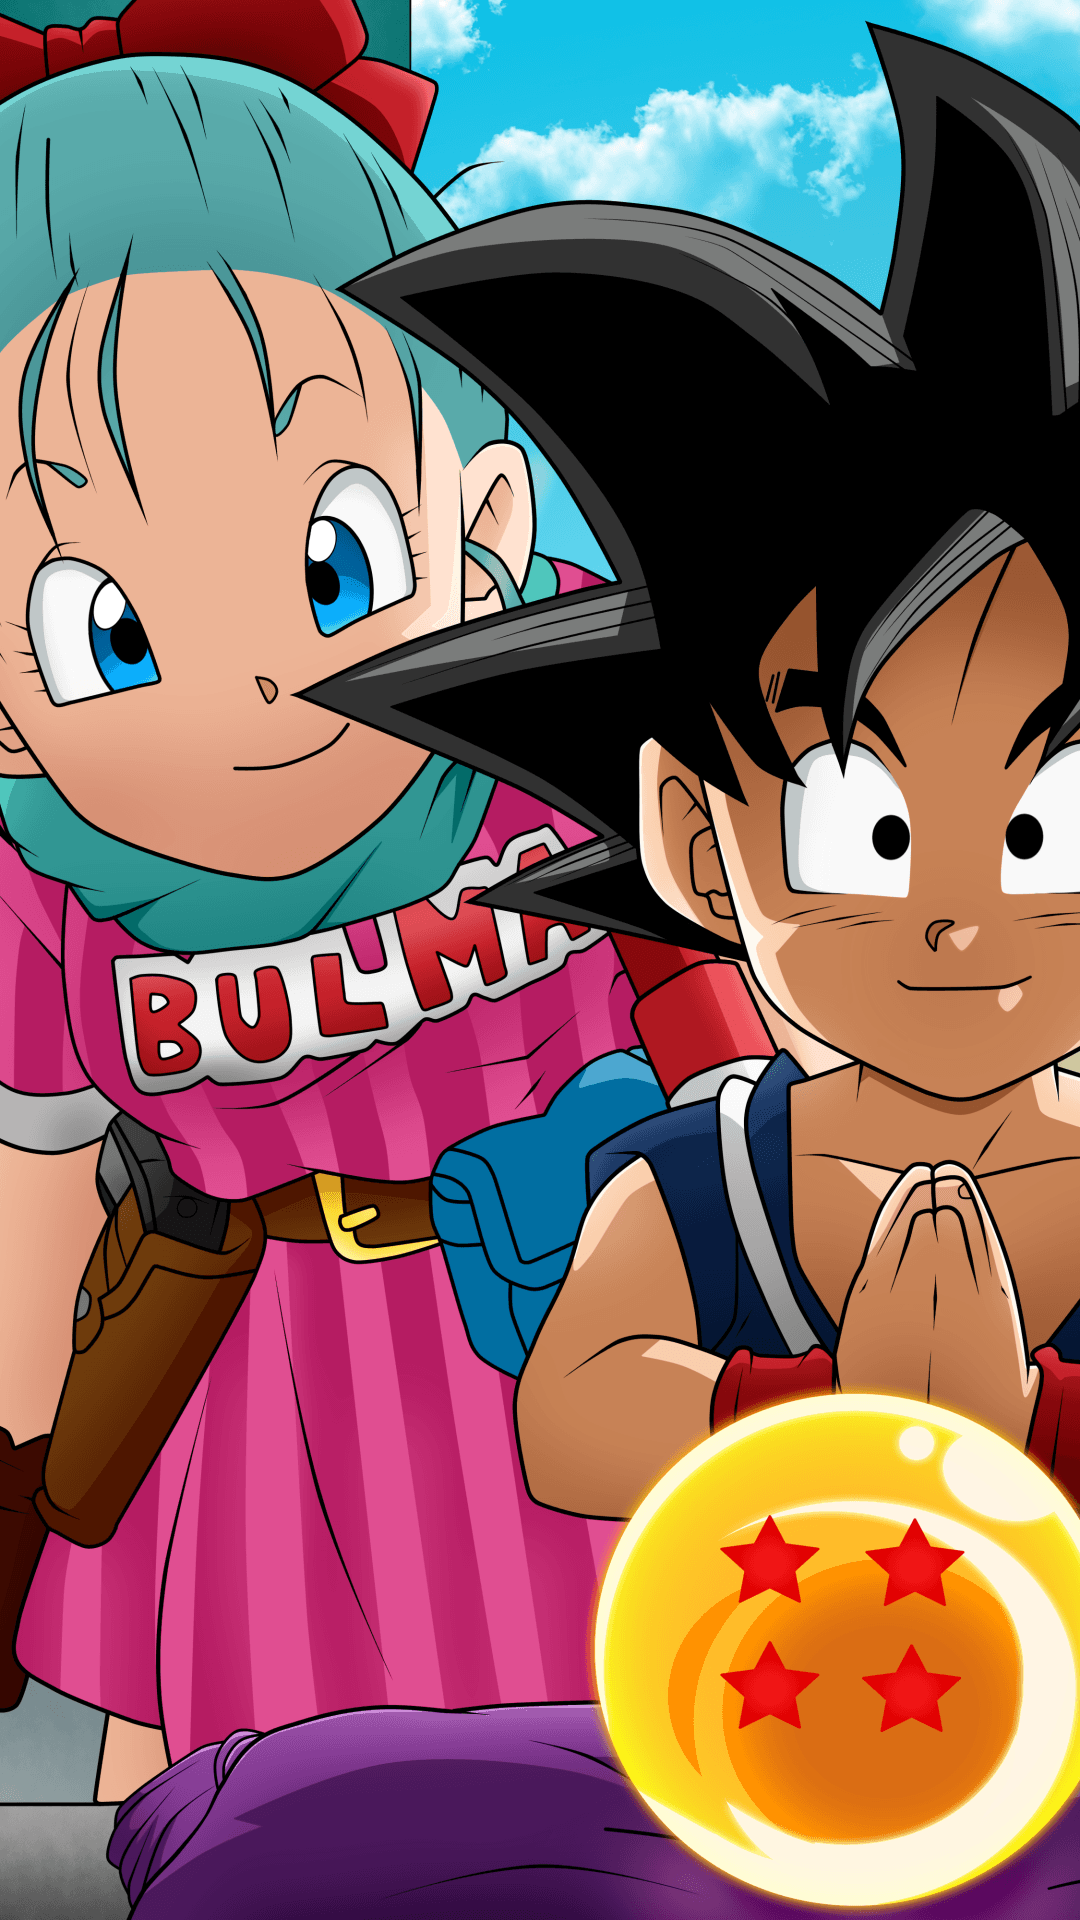 Download This Wallpaper Anime Dragon Ball (1080x1920) For All Your Phones And Tablets. Anime Dragon Ball Super, Dragon Ball Wallpaper, Anime Dragon Ball